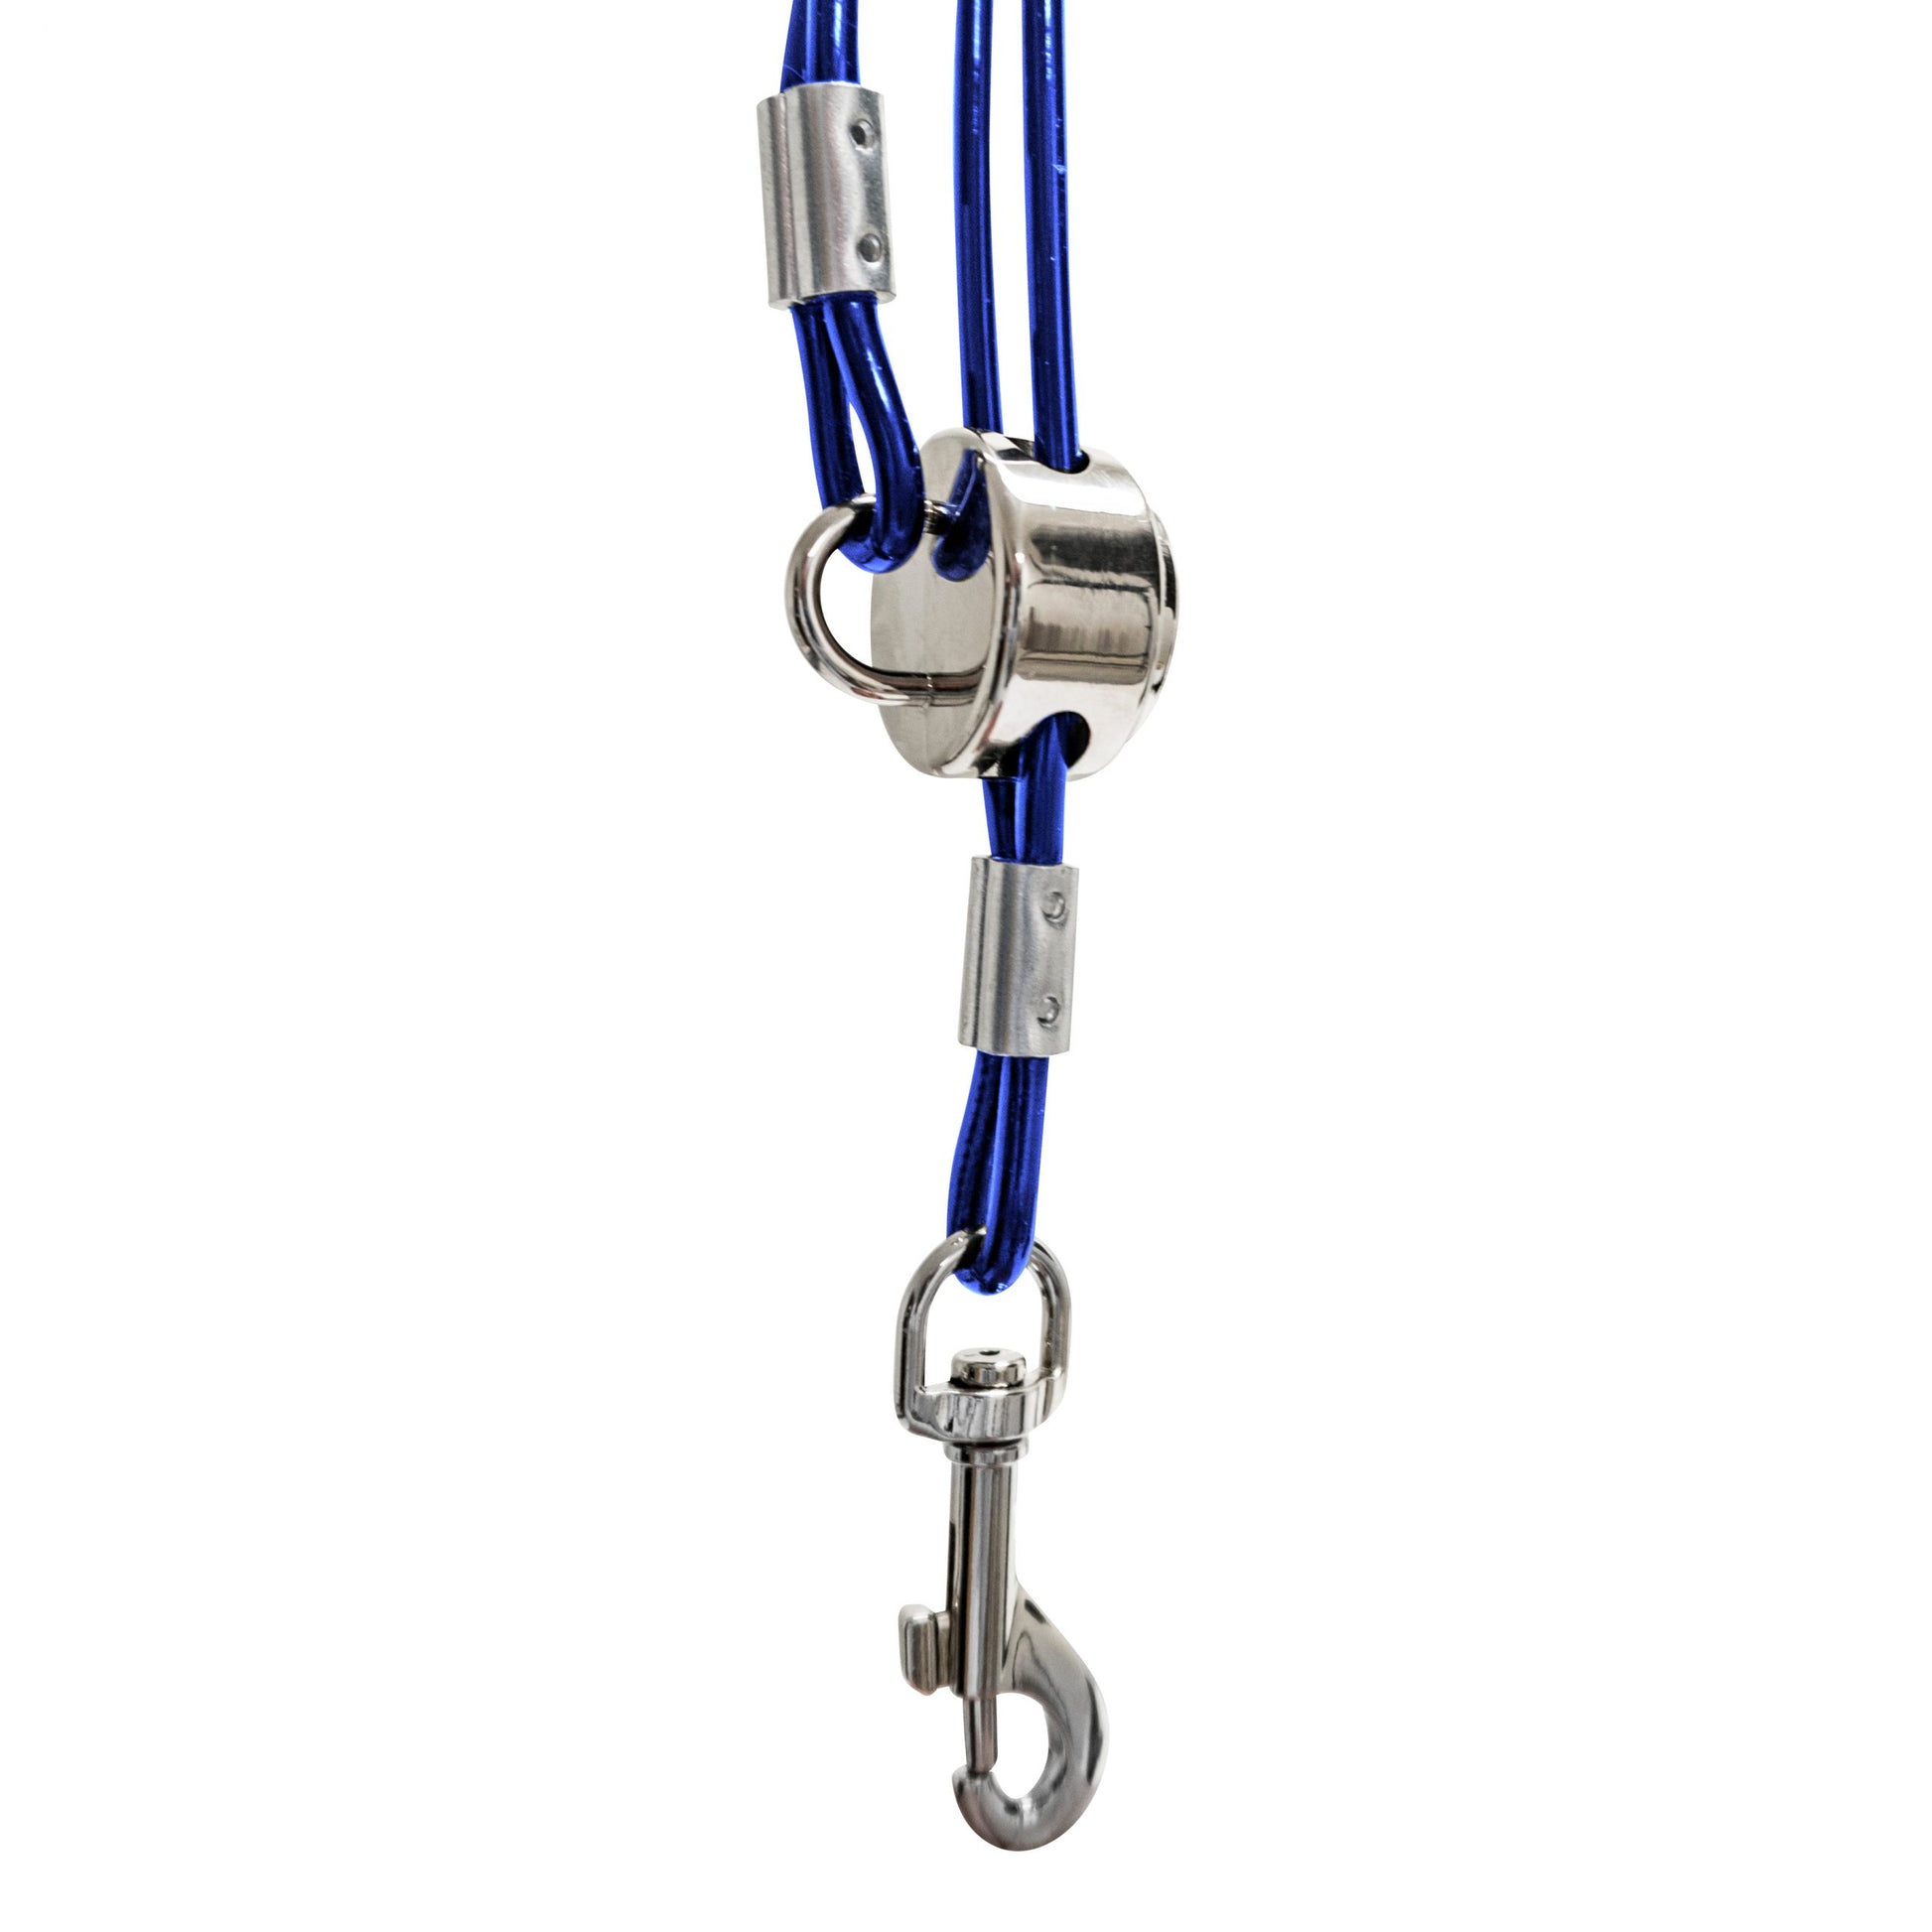 The Vinyl Trach Saver® professional pet grooming safety harness provides stabilizing support for small breed dogs and cats by looping around the front or back legs. The harness removes pressure from the neck to guards against choking, injury or trachea collapse. It also can provide comfort to pets with back issues.